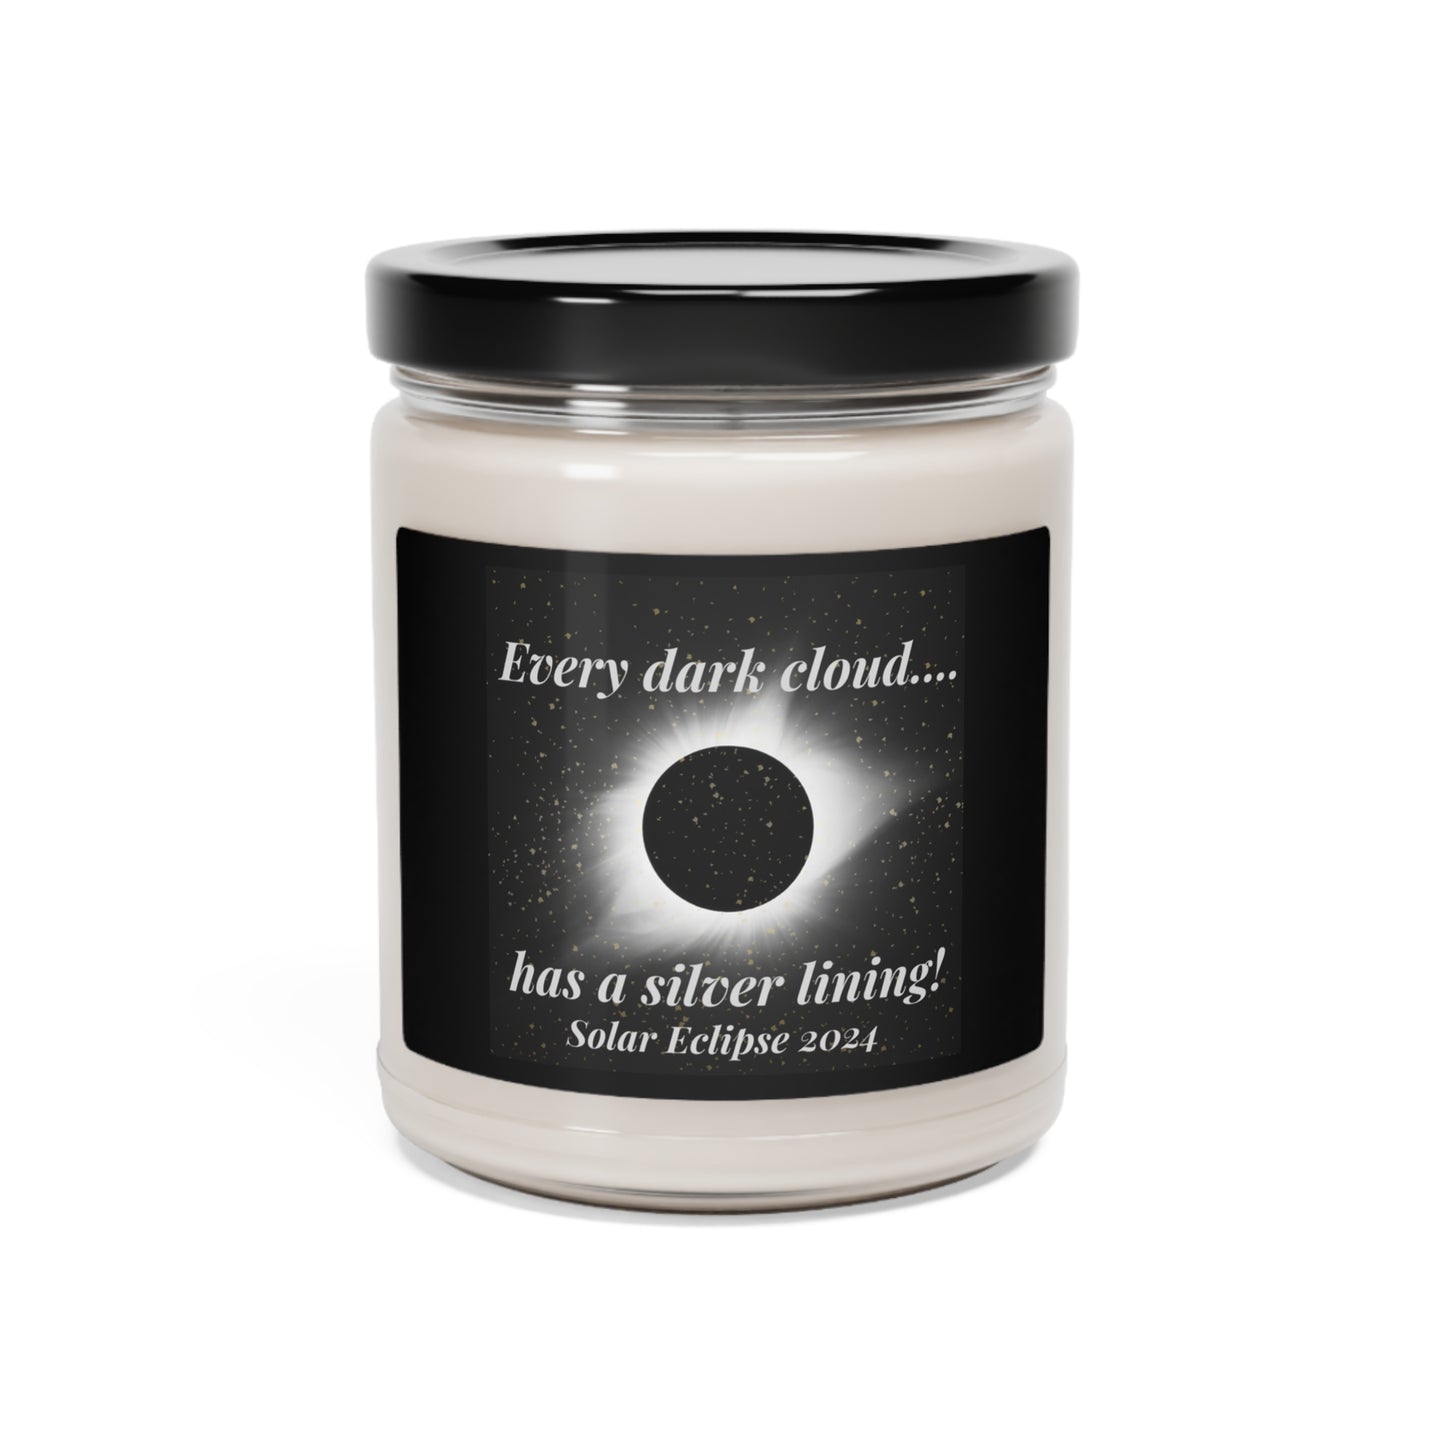 Silver Lining Scented Soy Candle, 9oz